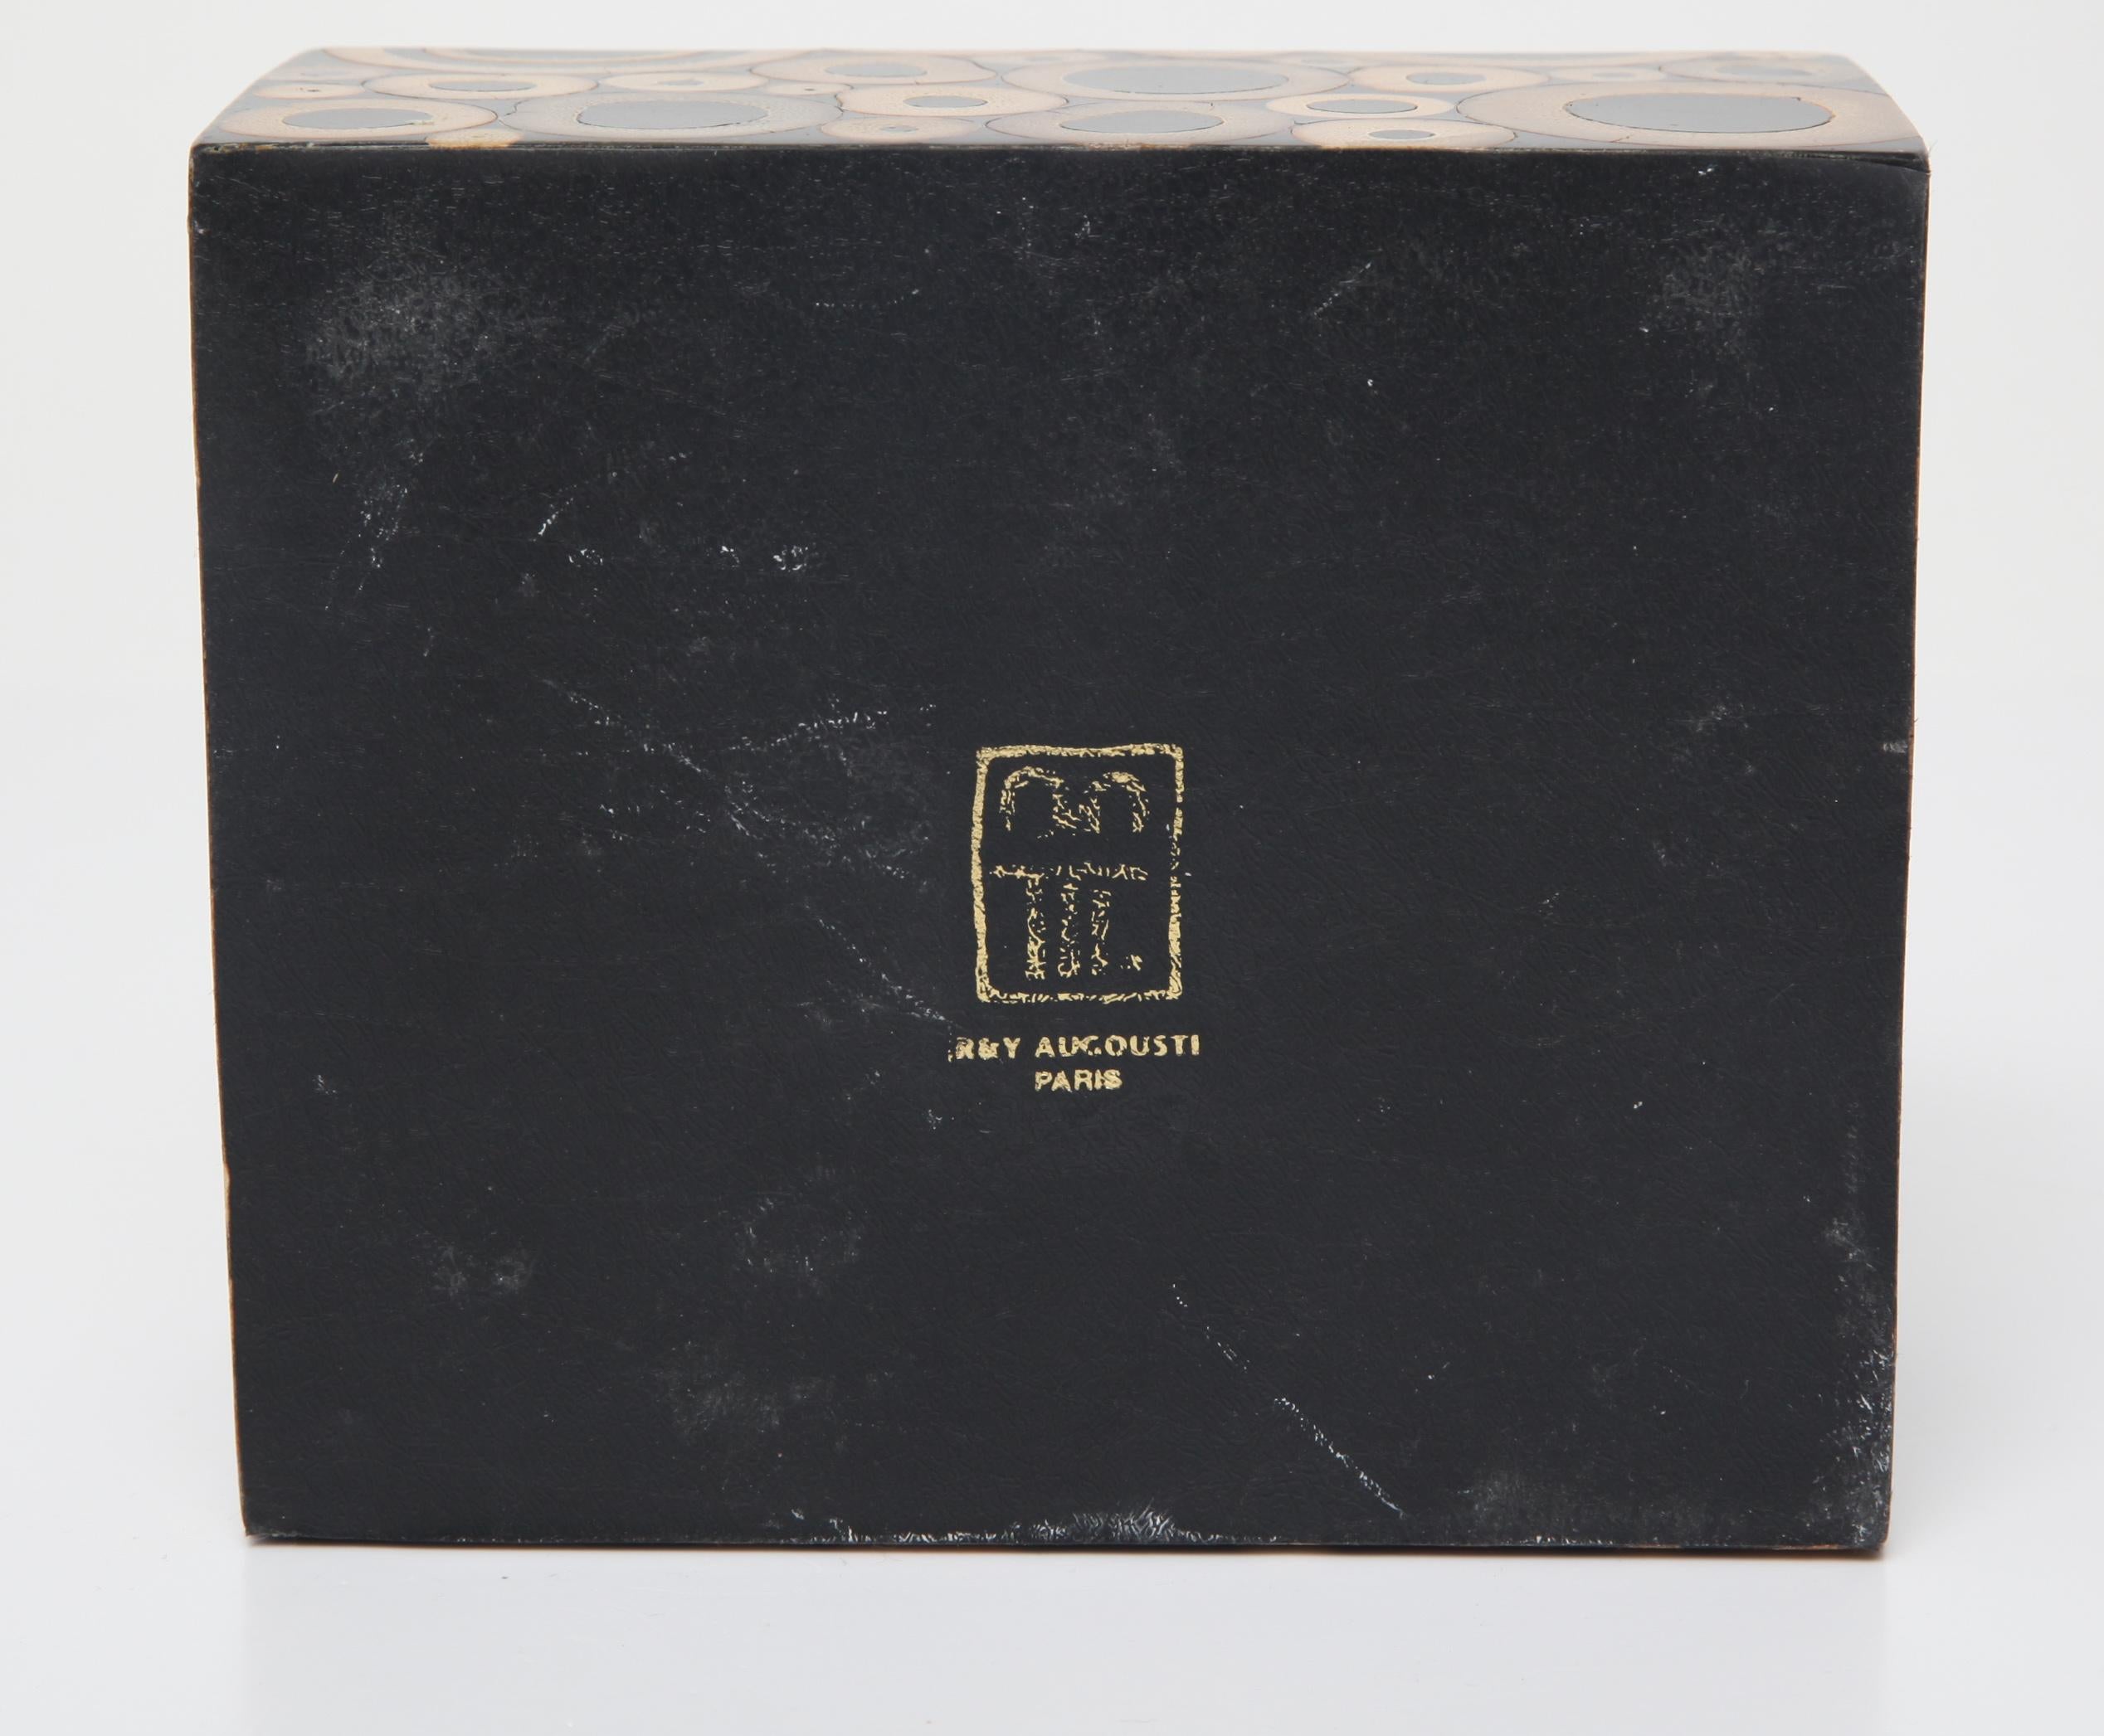 R & Y Augousti French Modern Bamboo Covered Box 2